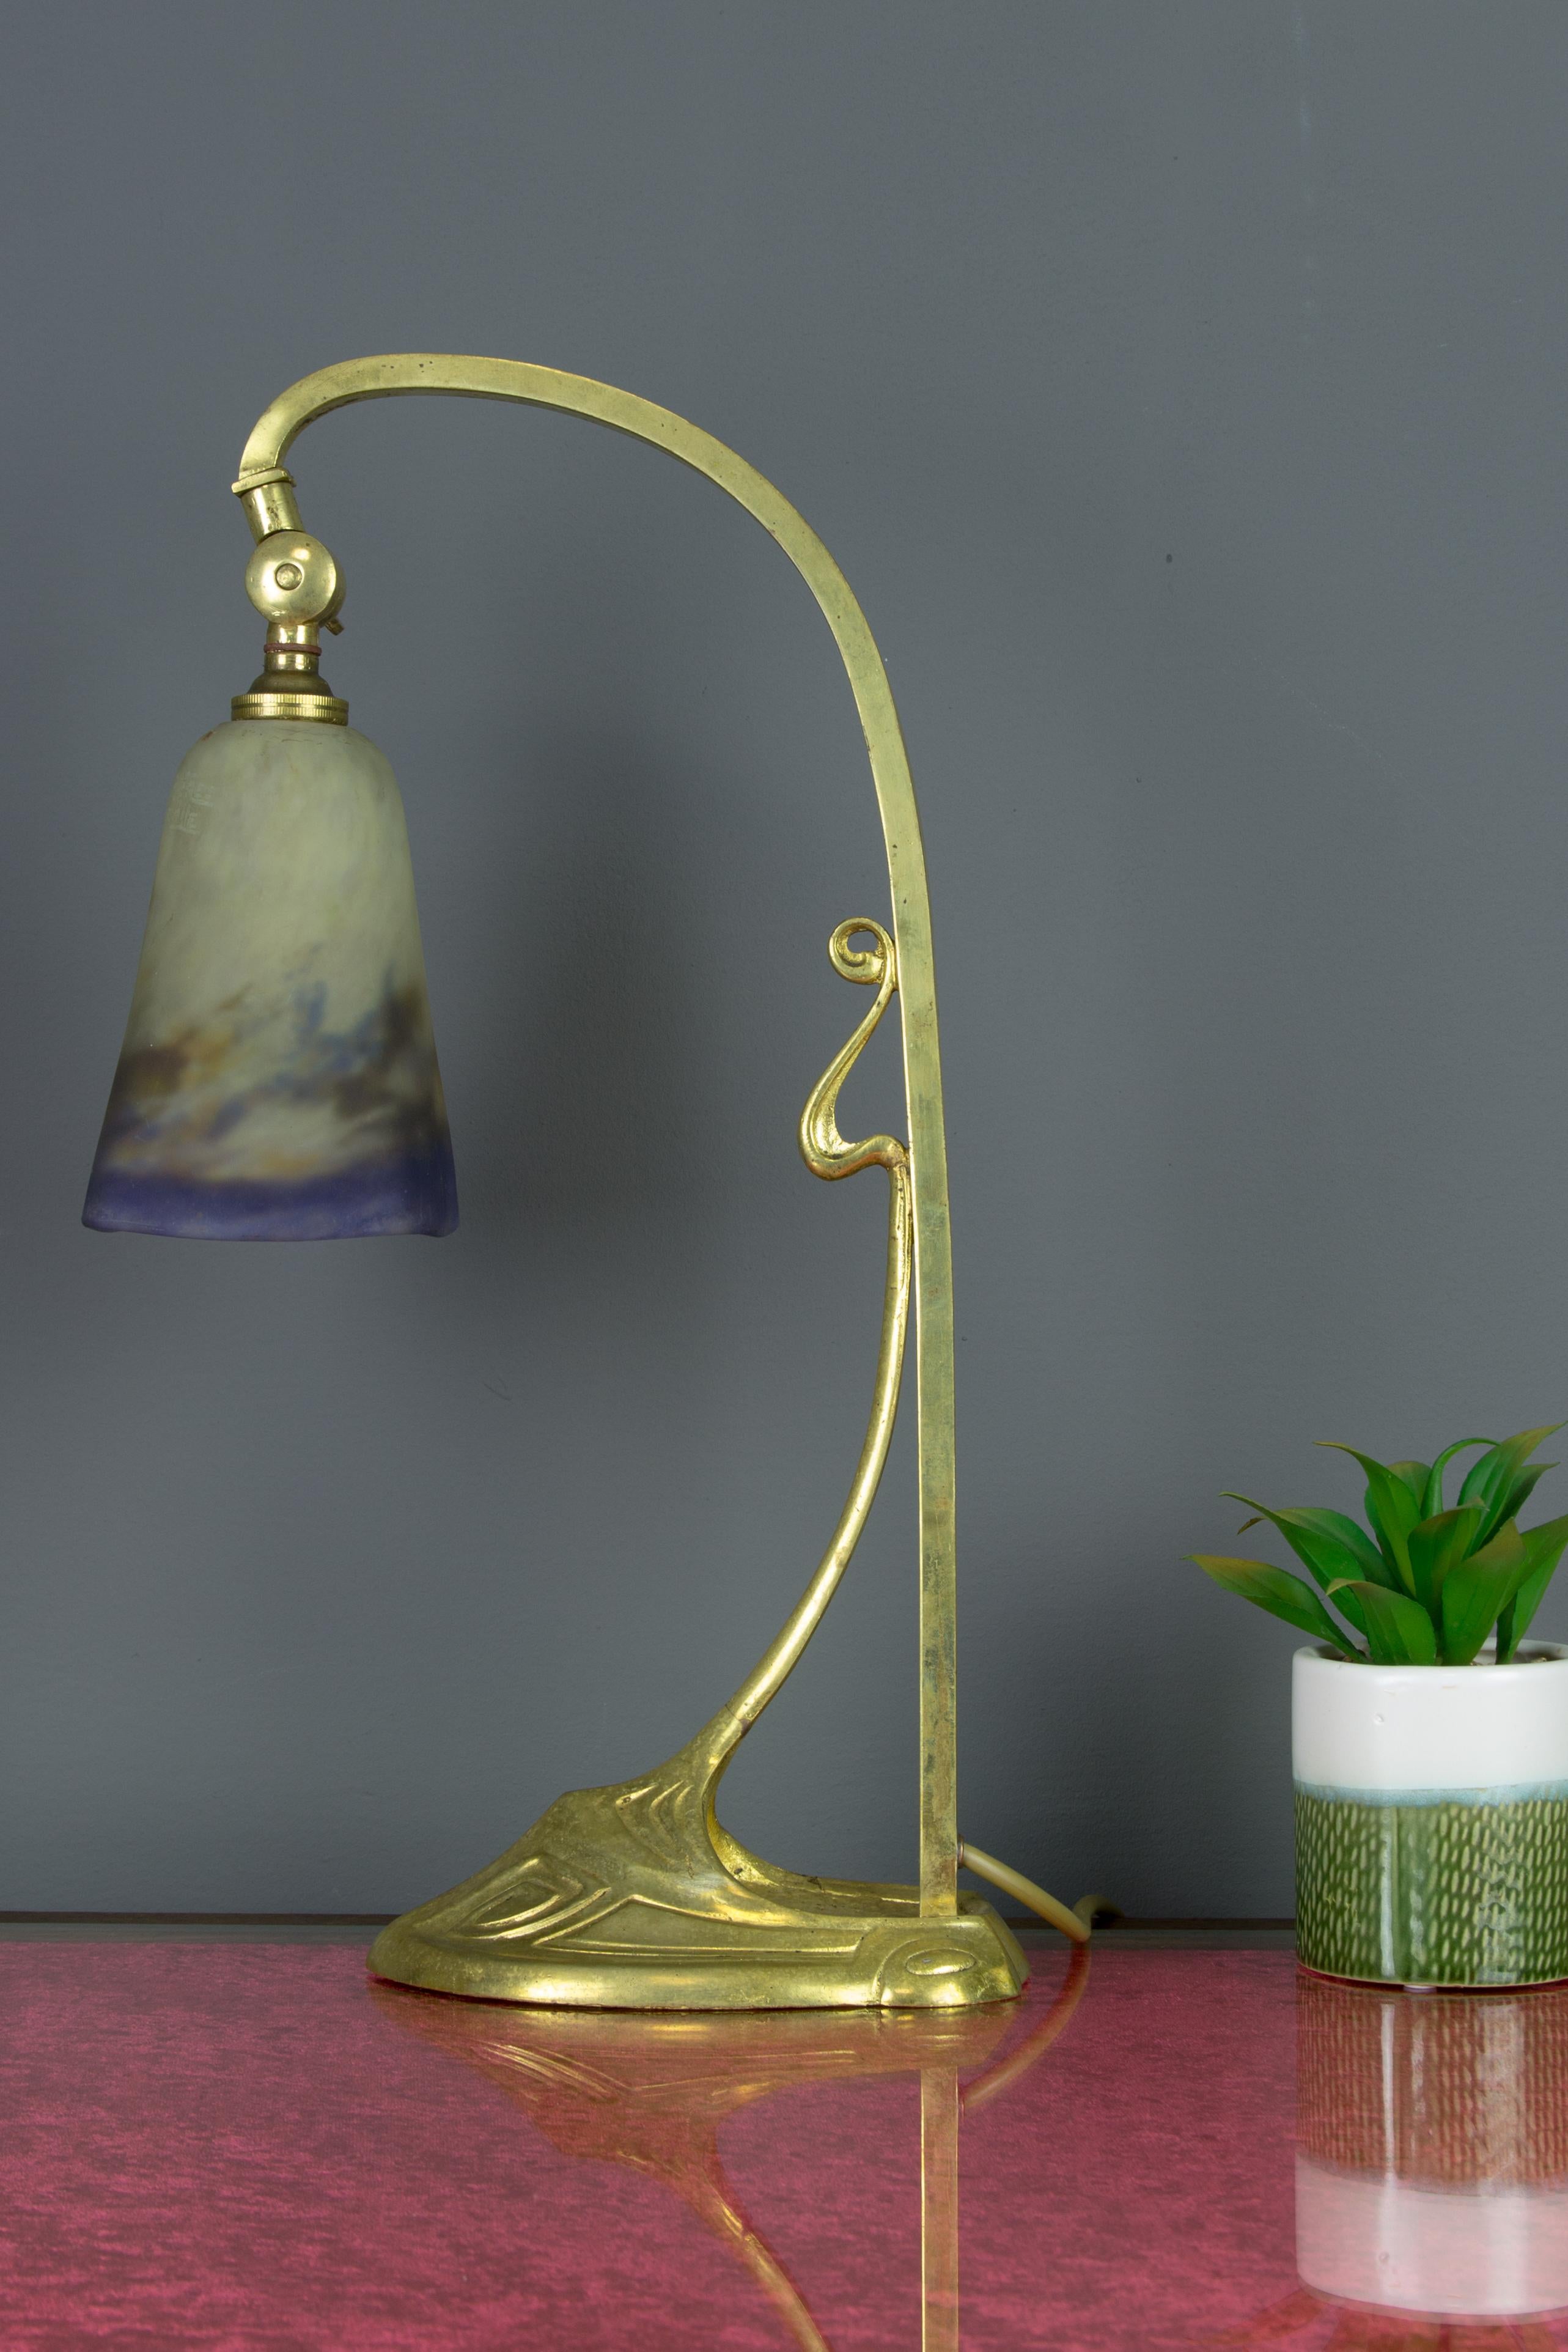 This adorable French Art Nouveau period table lamp features beautiful gilt bronze detailing with typical lines and ornaments of Art Nouveau style. An attractive “pate-de-Verre” lampshade in crème, with blue, purple, green, and brown color accents;